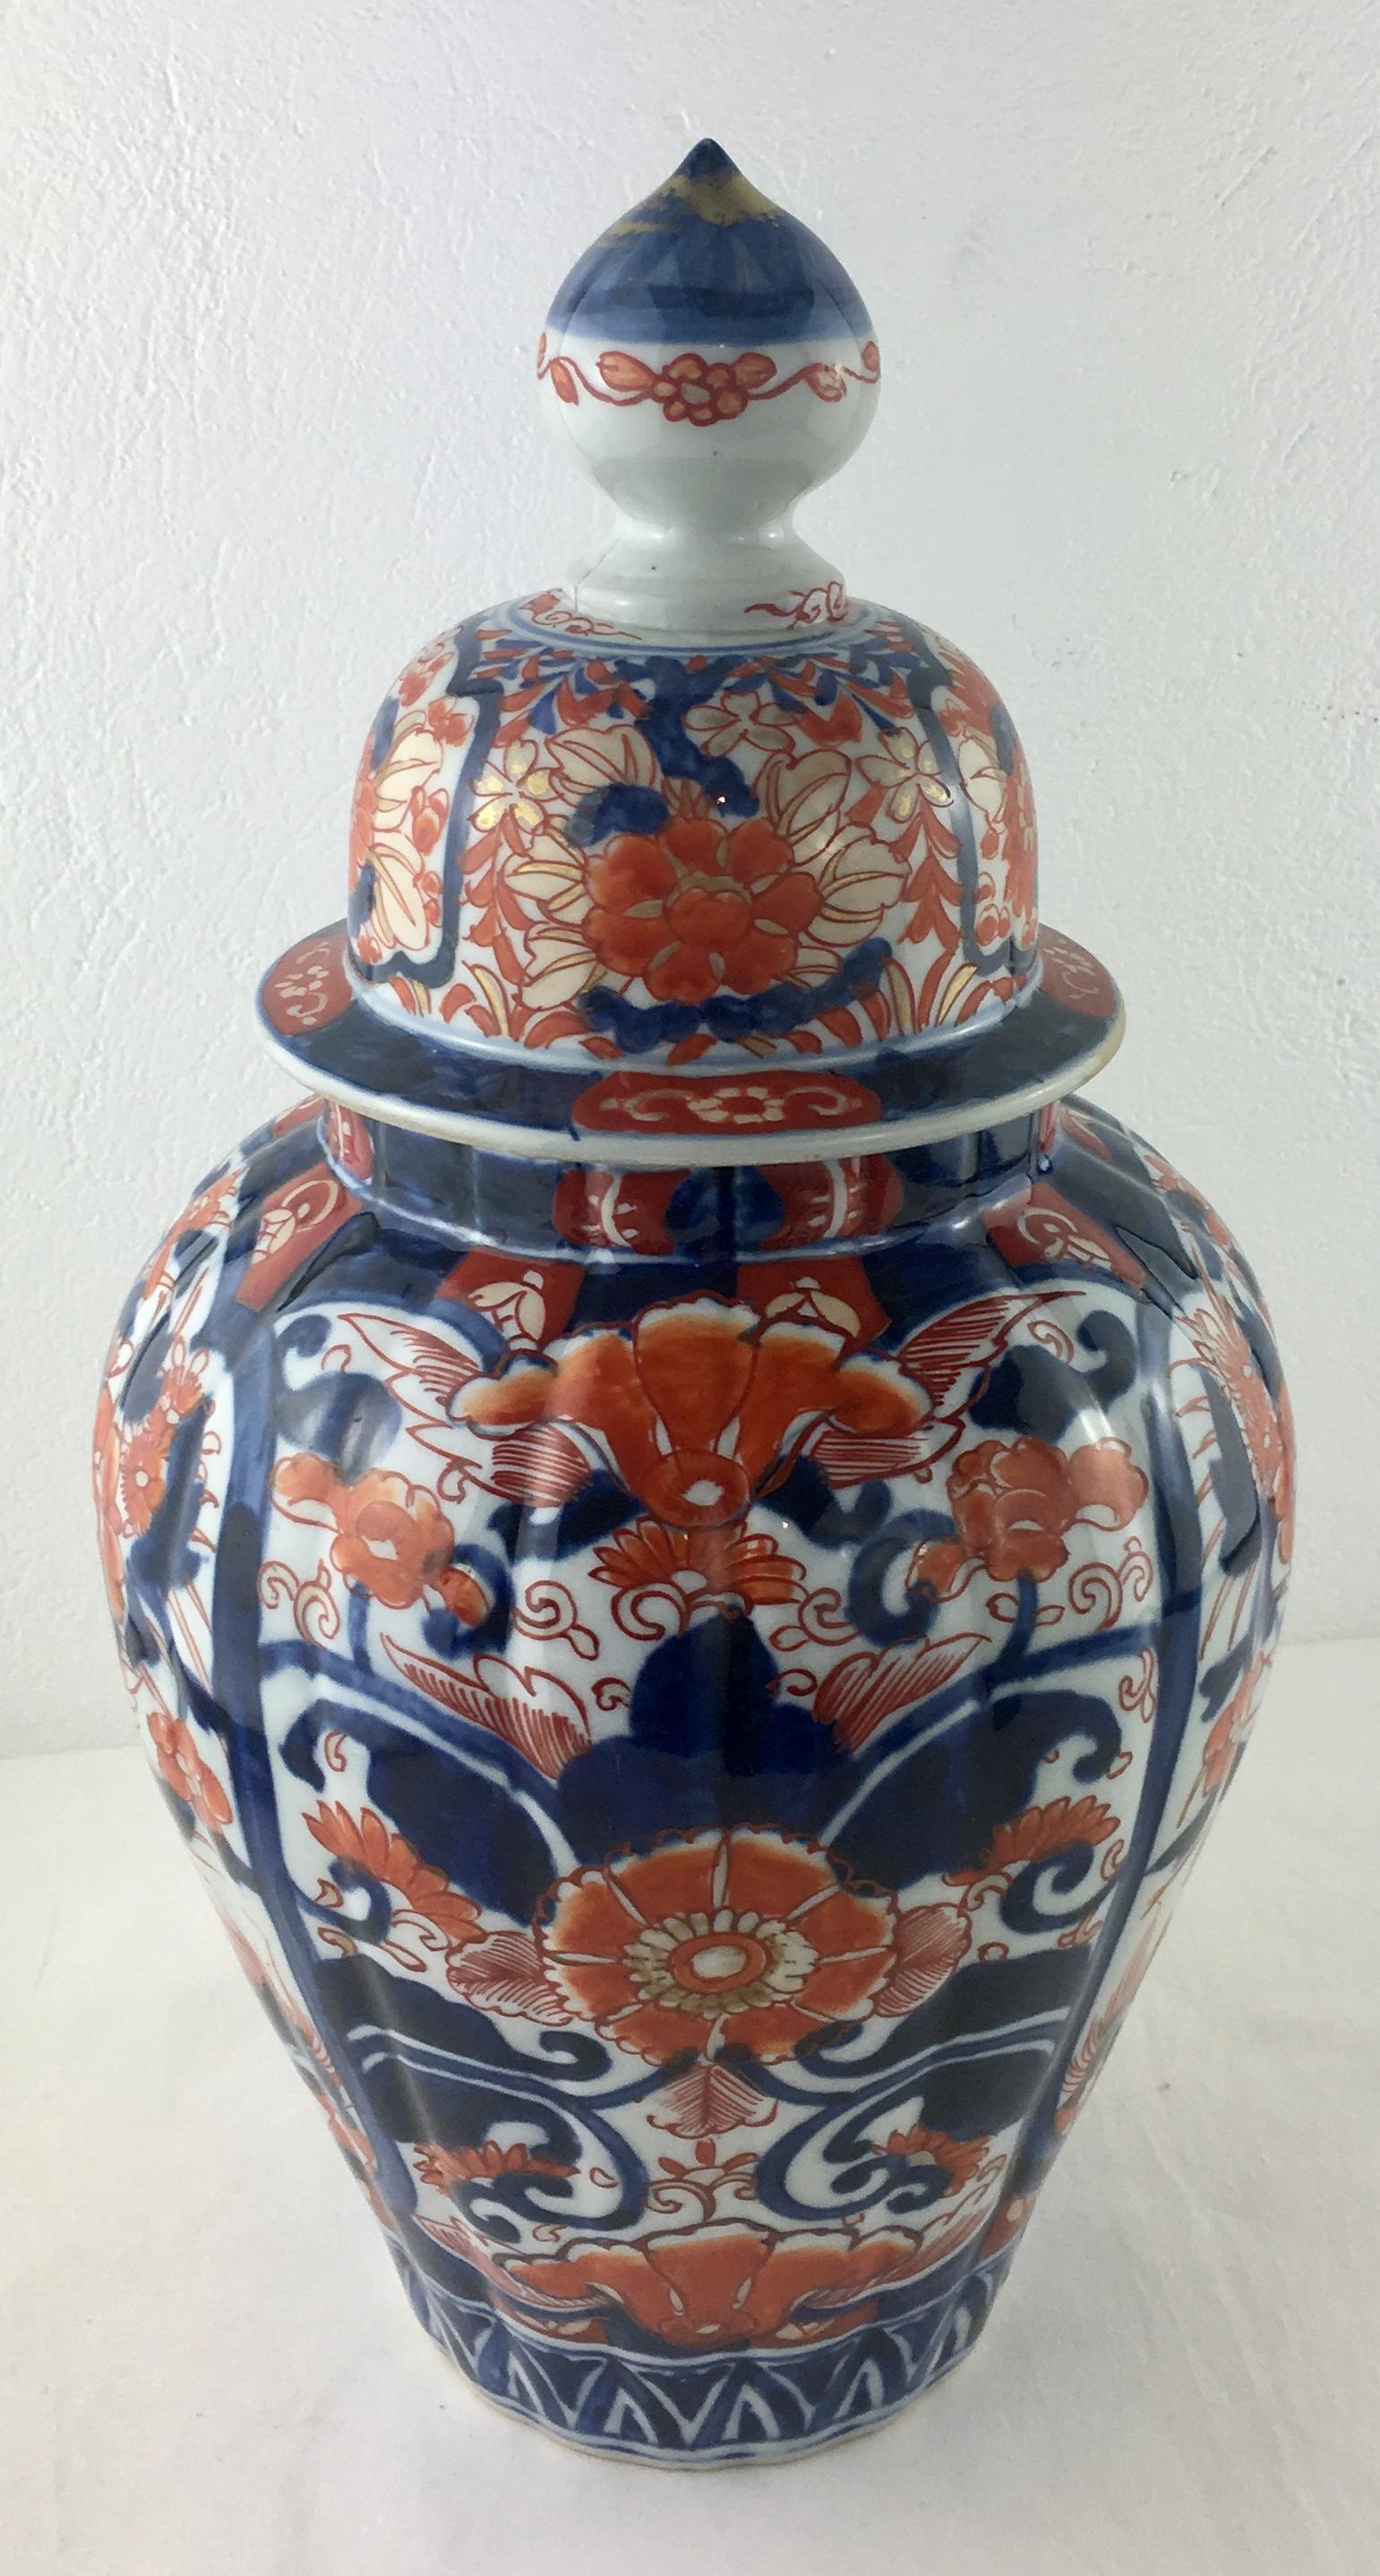 A very good quality 19th century Japanese Imari temple jar with a fluted form to the lid, classical motifs, ikebana flowers, foliage, ribbons and balls. 

This Meiji period decorative jar has a beautiful patina and like all of its kind is hand